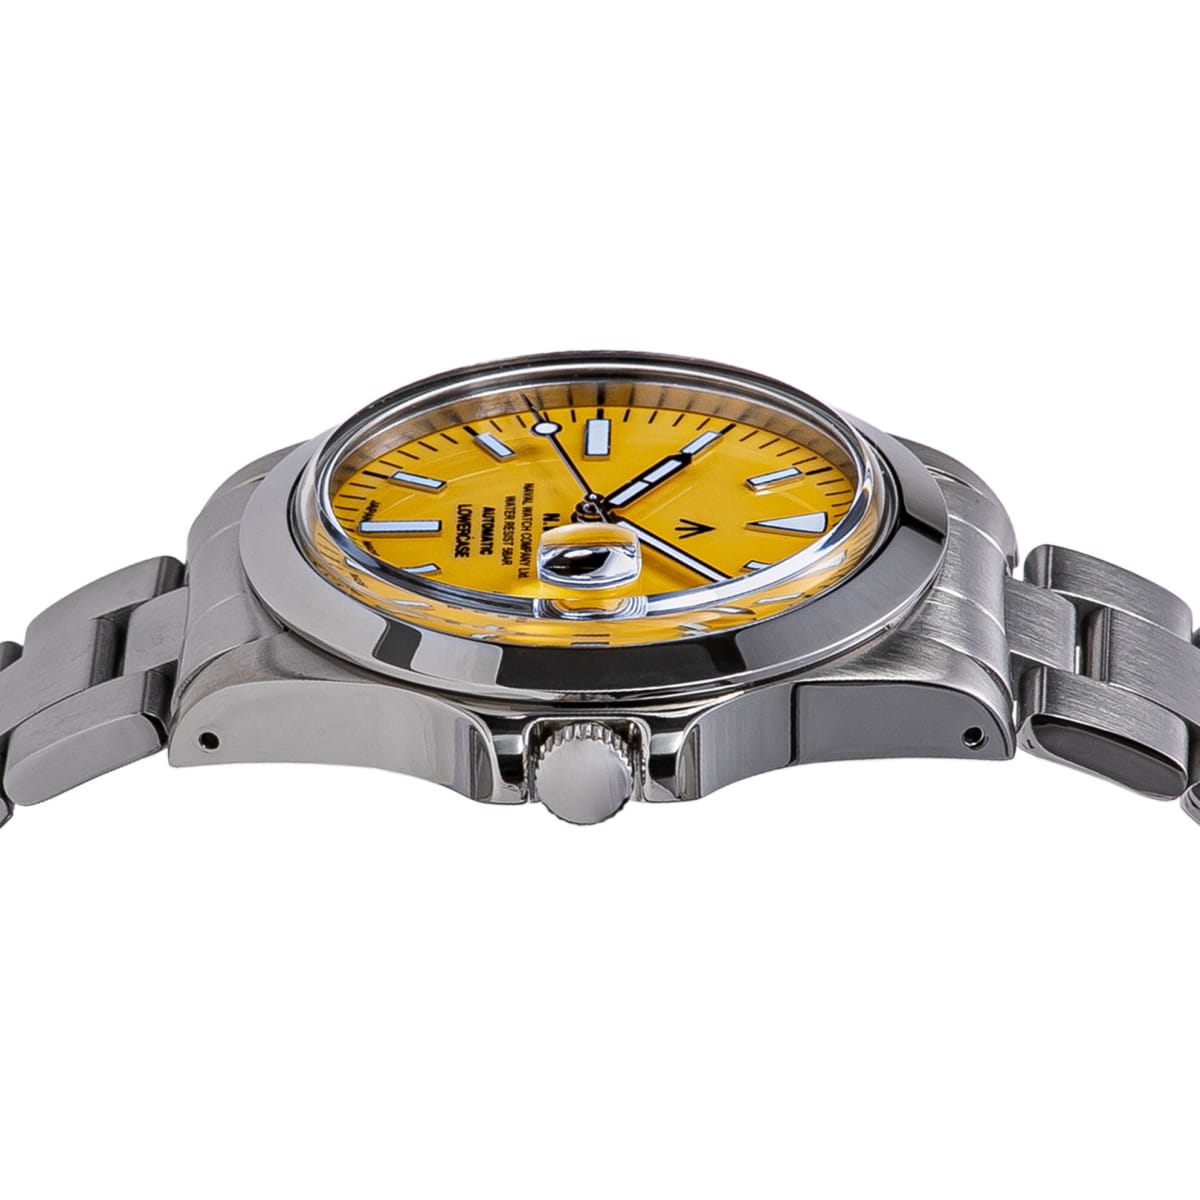 Naval Watch introduces a new collection of dial colors for its